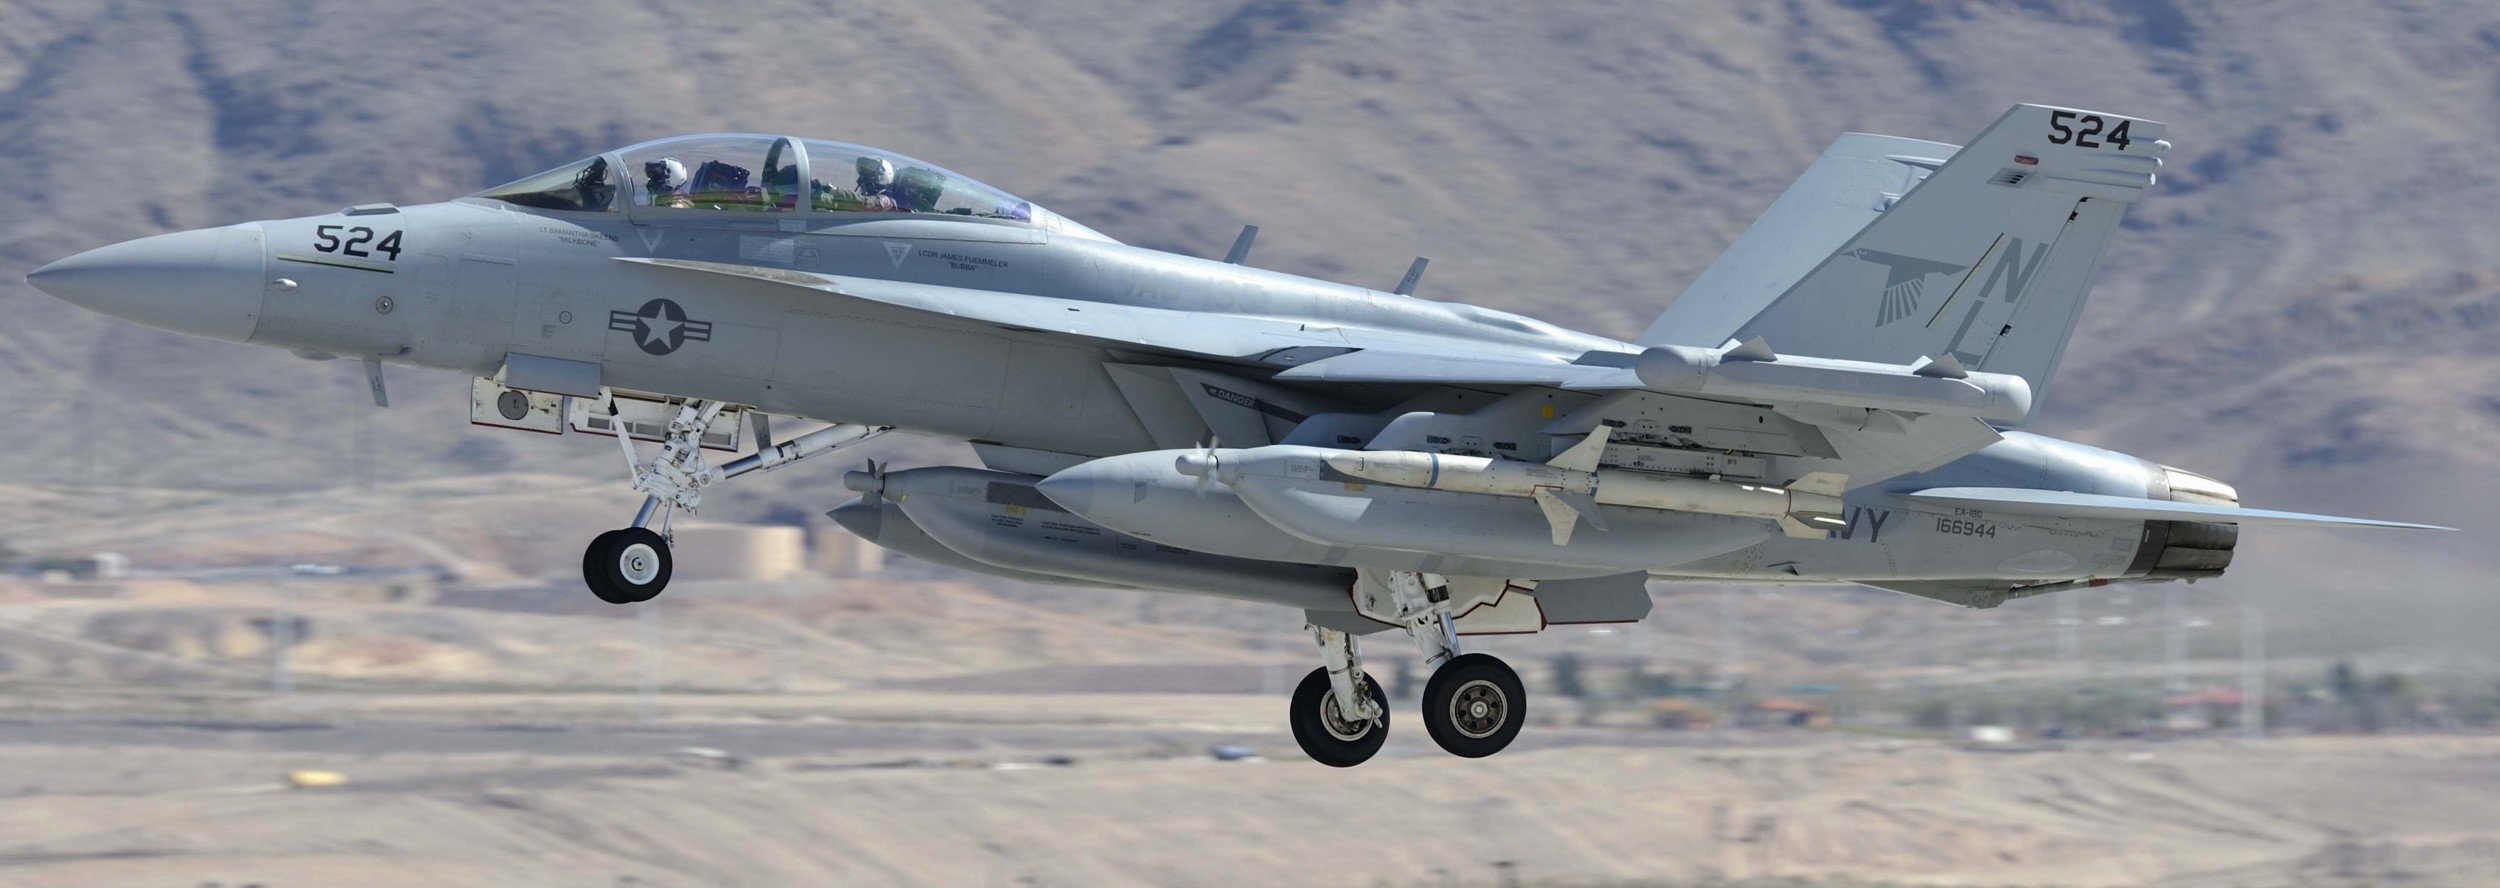 vaq-135 black ravens electronic attack squadron vaqron us navy boeing ea-18g growler exercise red flag 13-3 nellis afb nevada 134